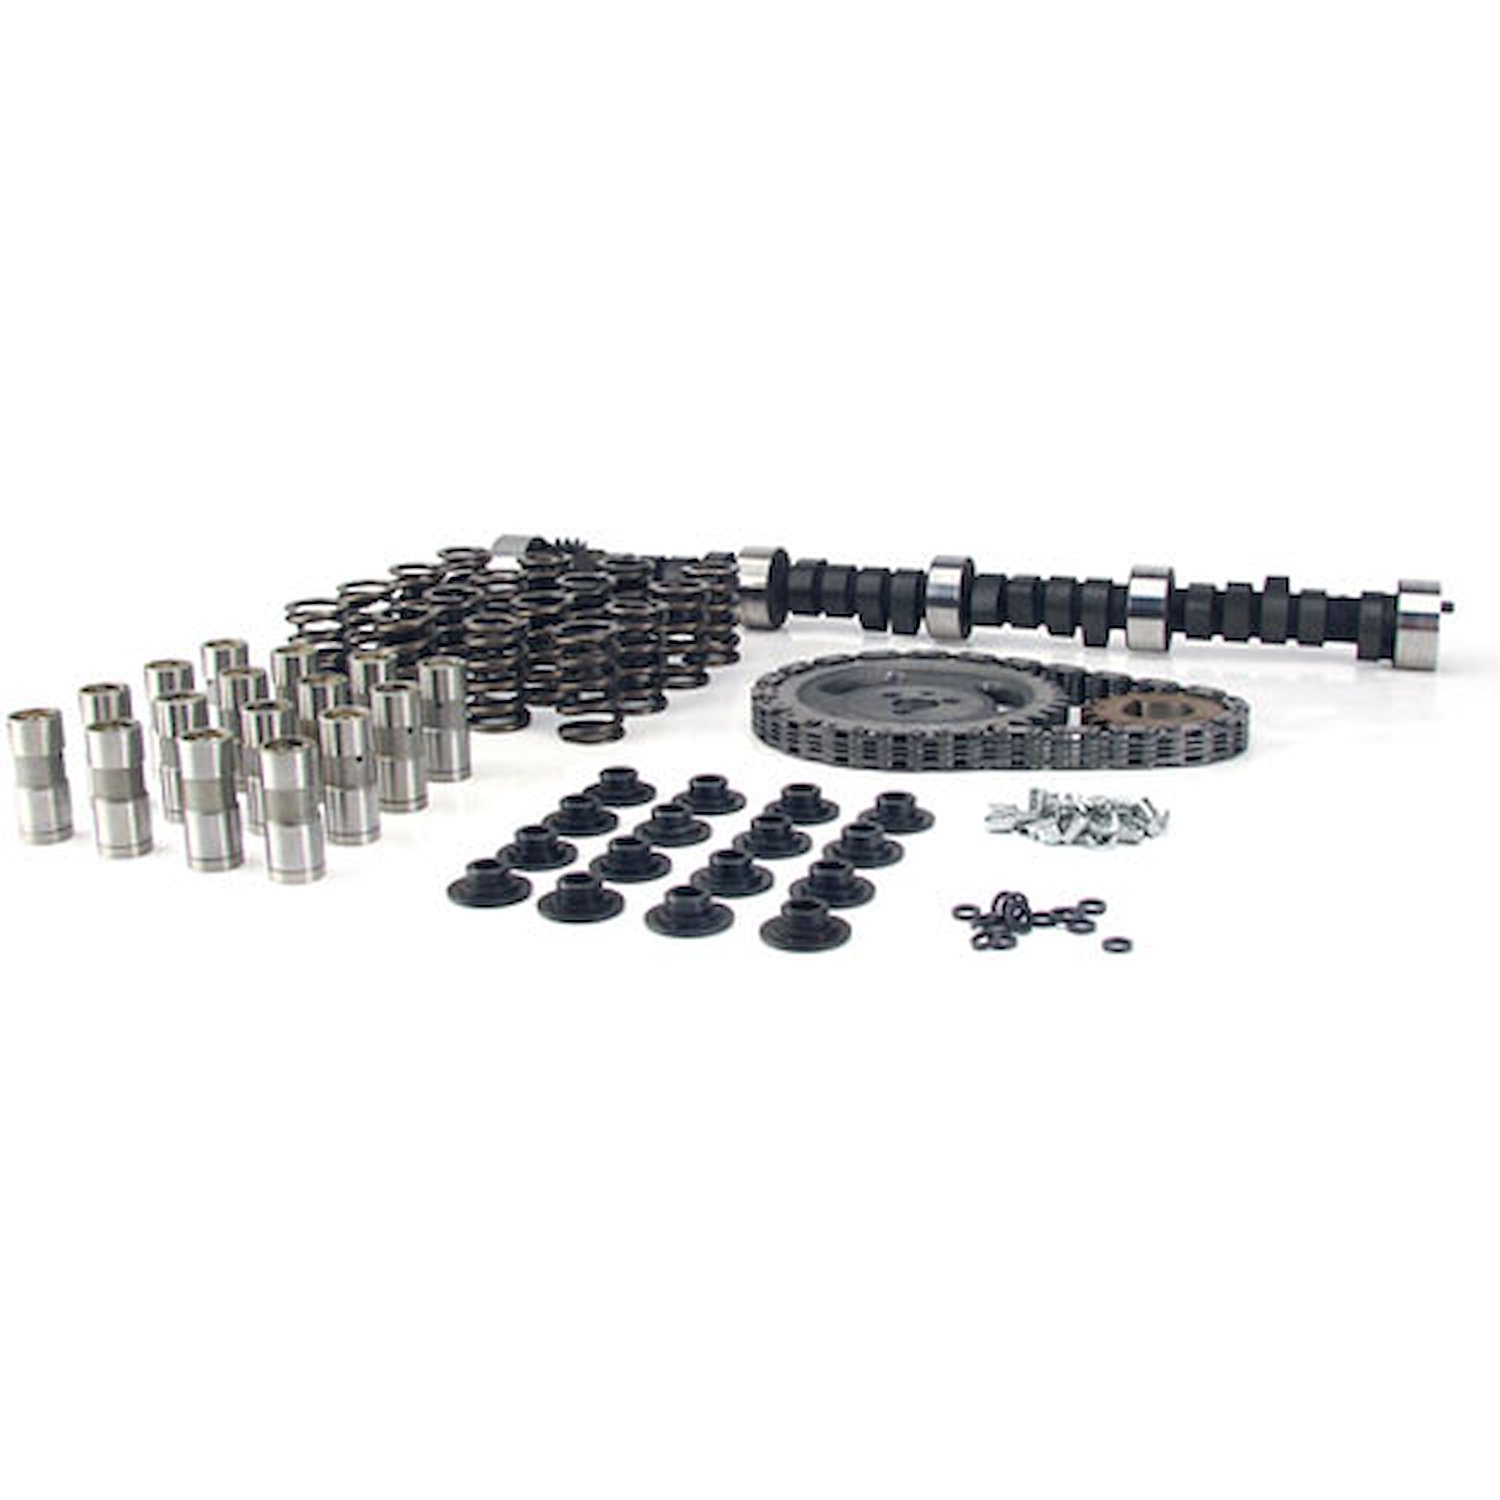 Xtreme Energy 294H Hydraulic Flat Tappet Camshaft Complete Kit Lift: .588" /.593" Duration: 294°/306° RPM Range: 2800-7000